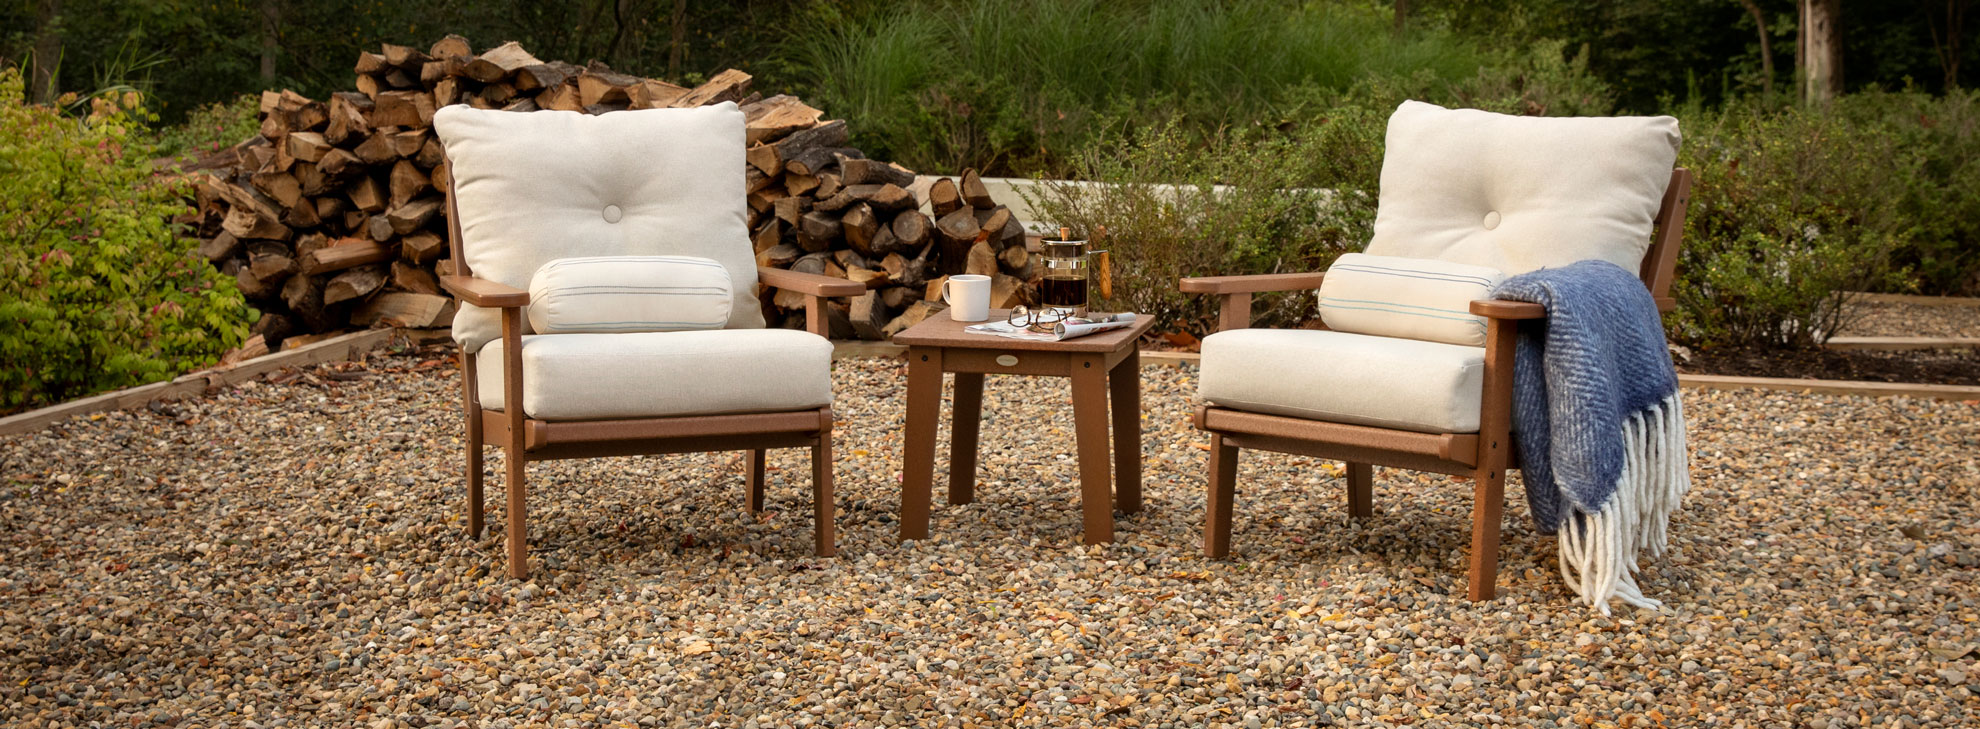 Outdoor Lounge Space Under $1,500